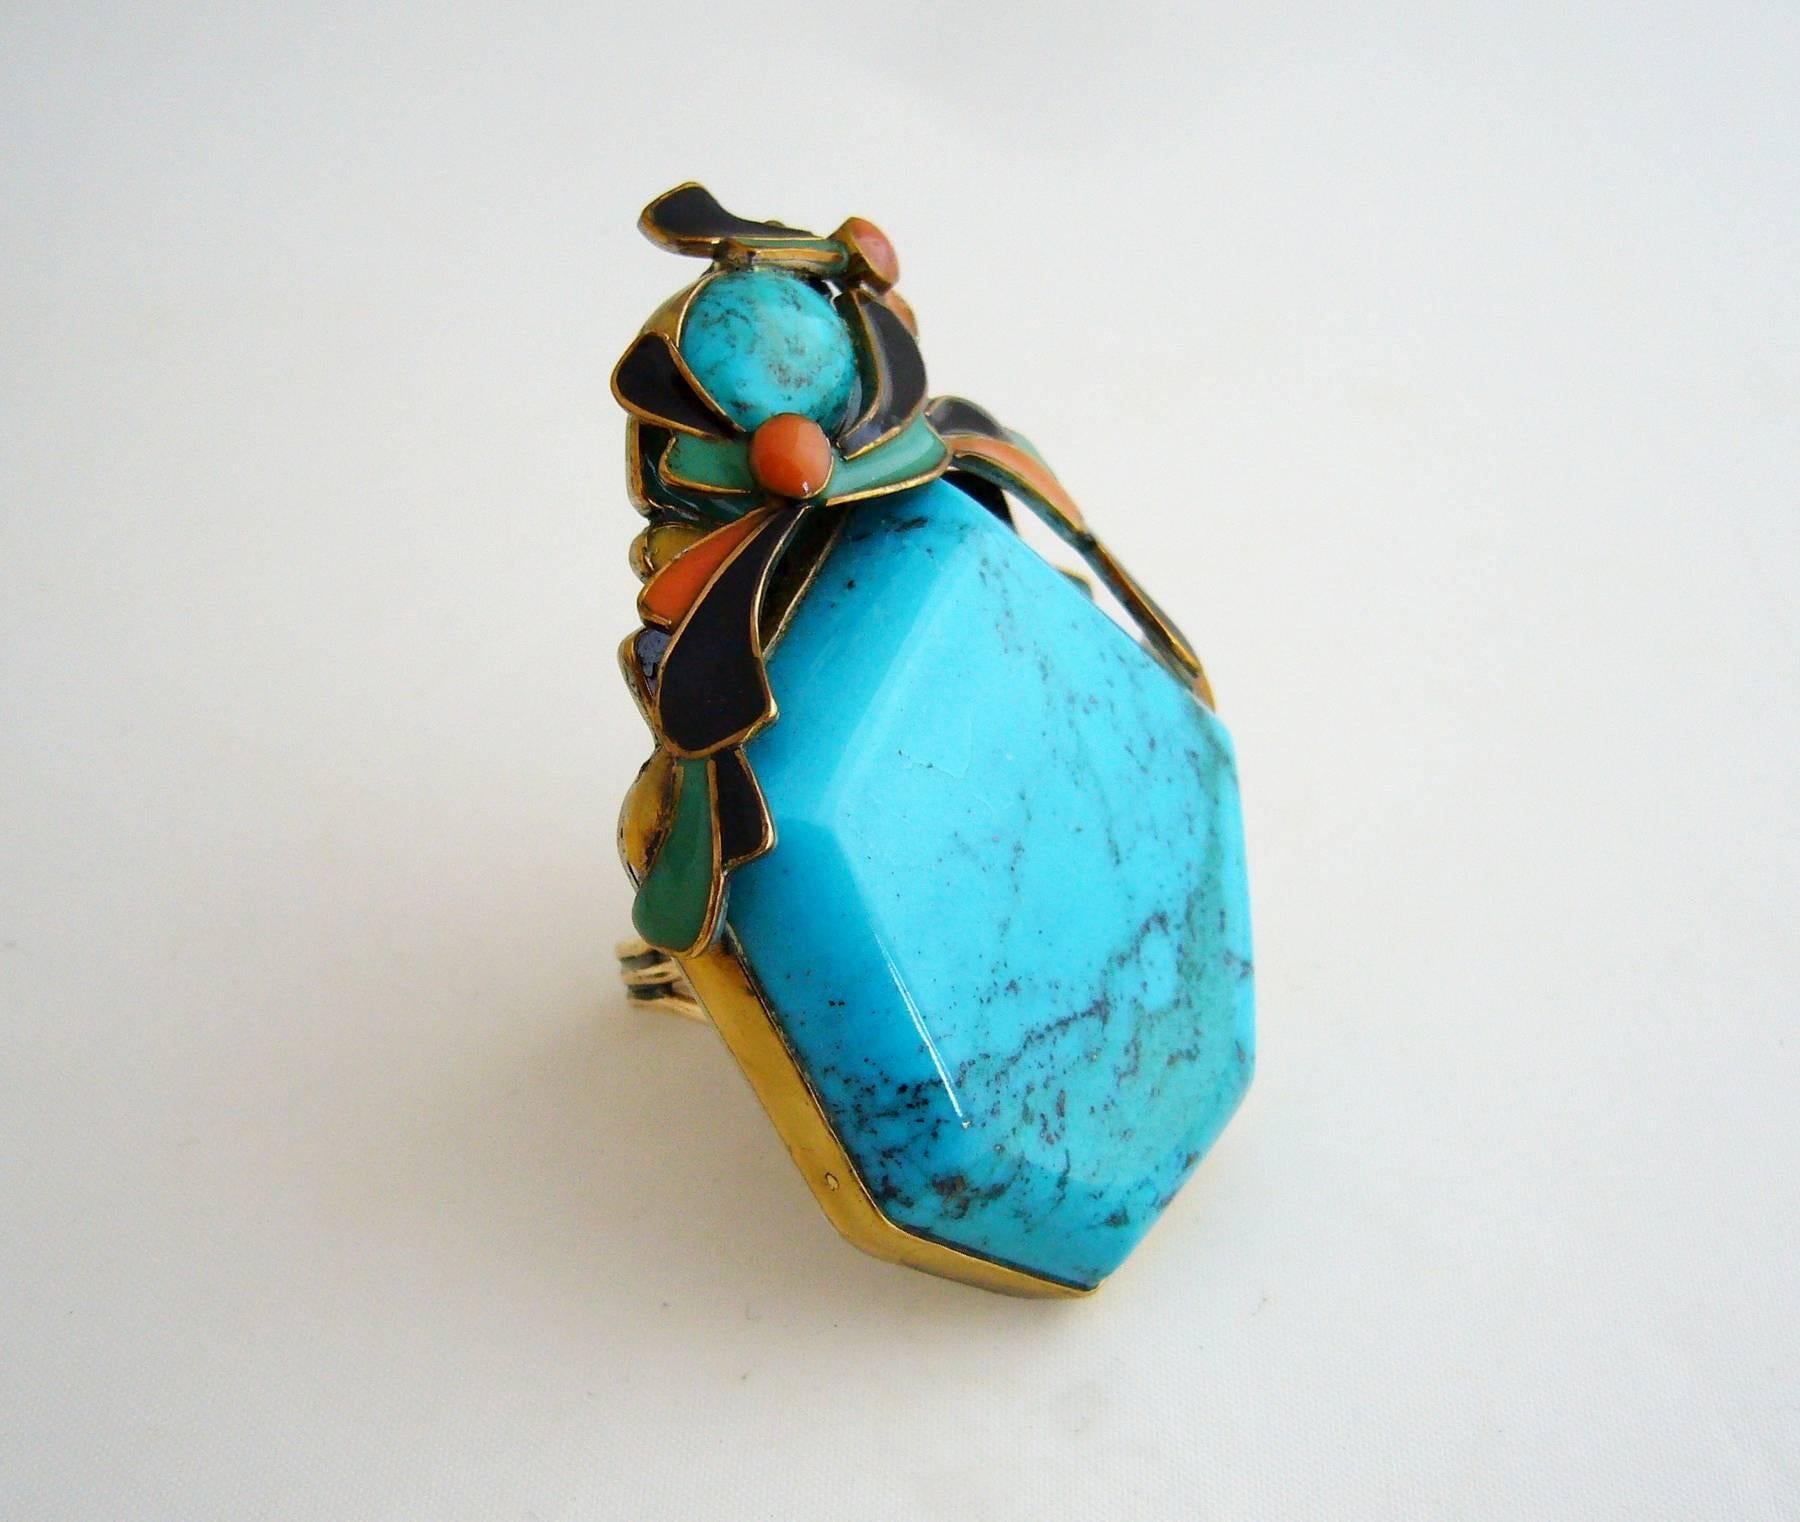 Large scale turquoise, coral and enamel ring created by Vega Maddux of Southern California.  Face of the ring measures 2 7/8